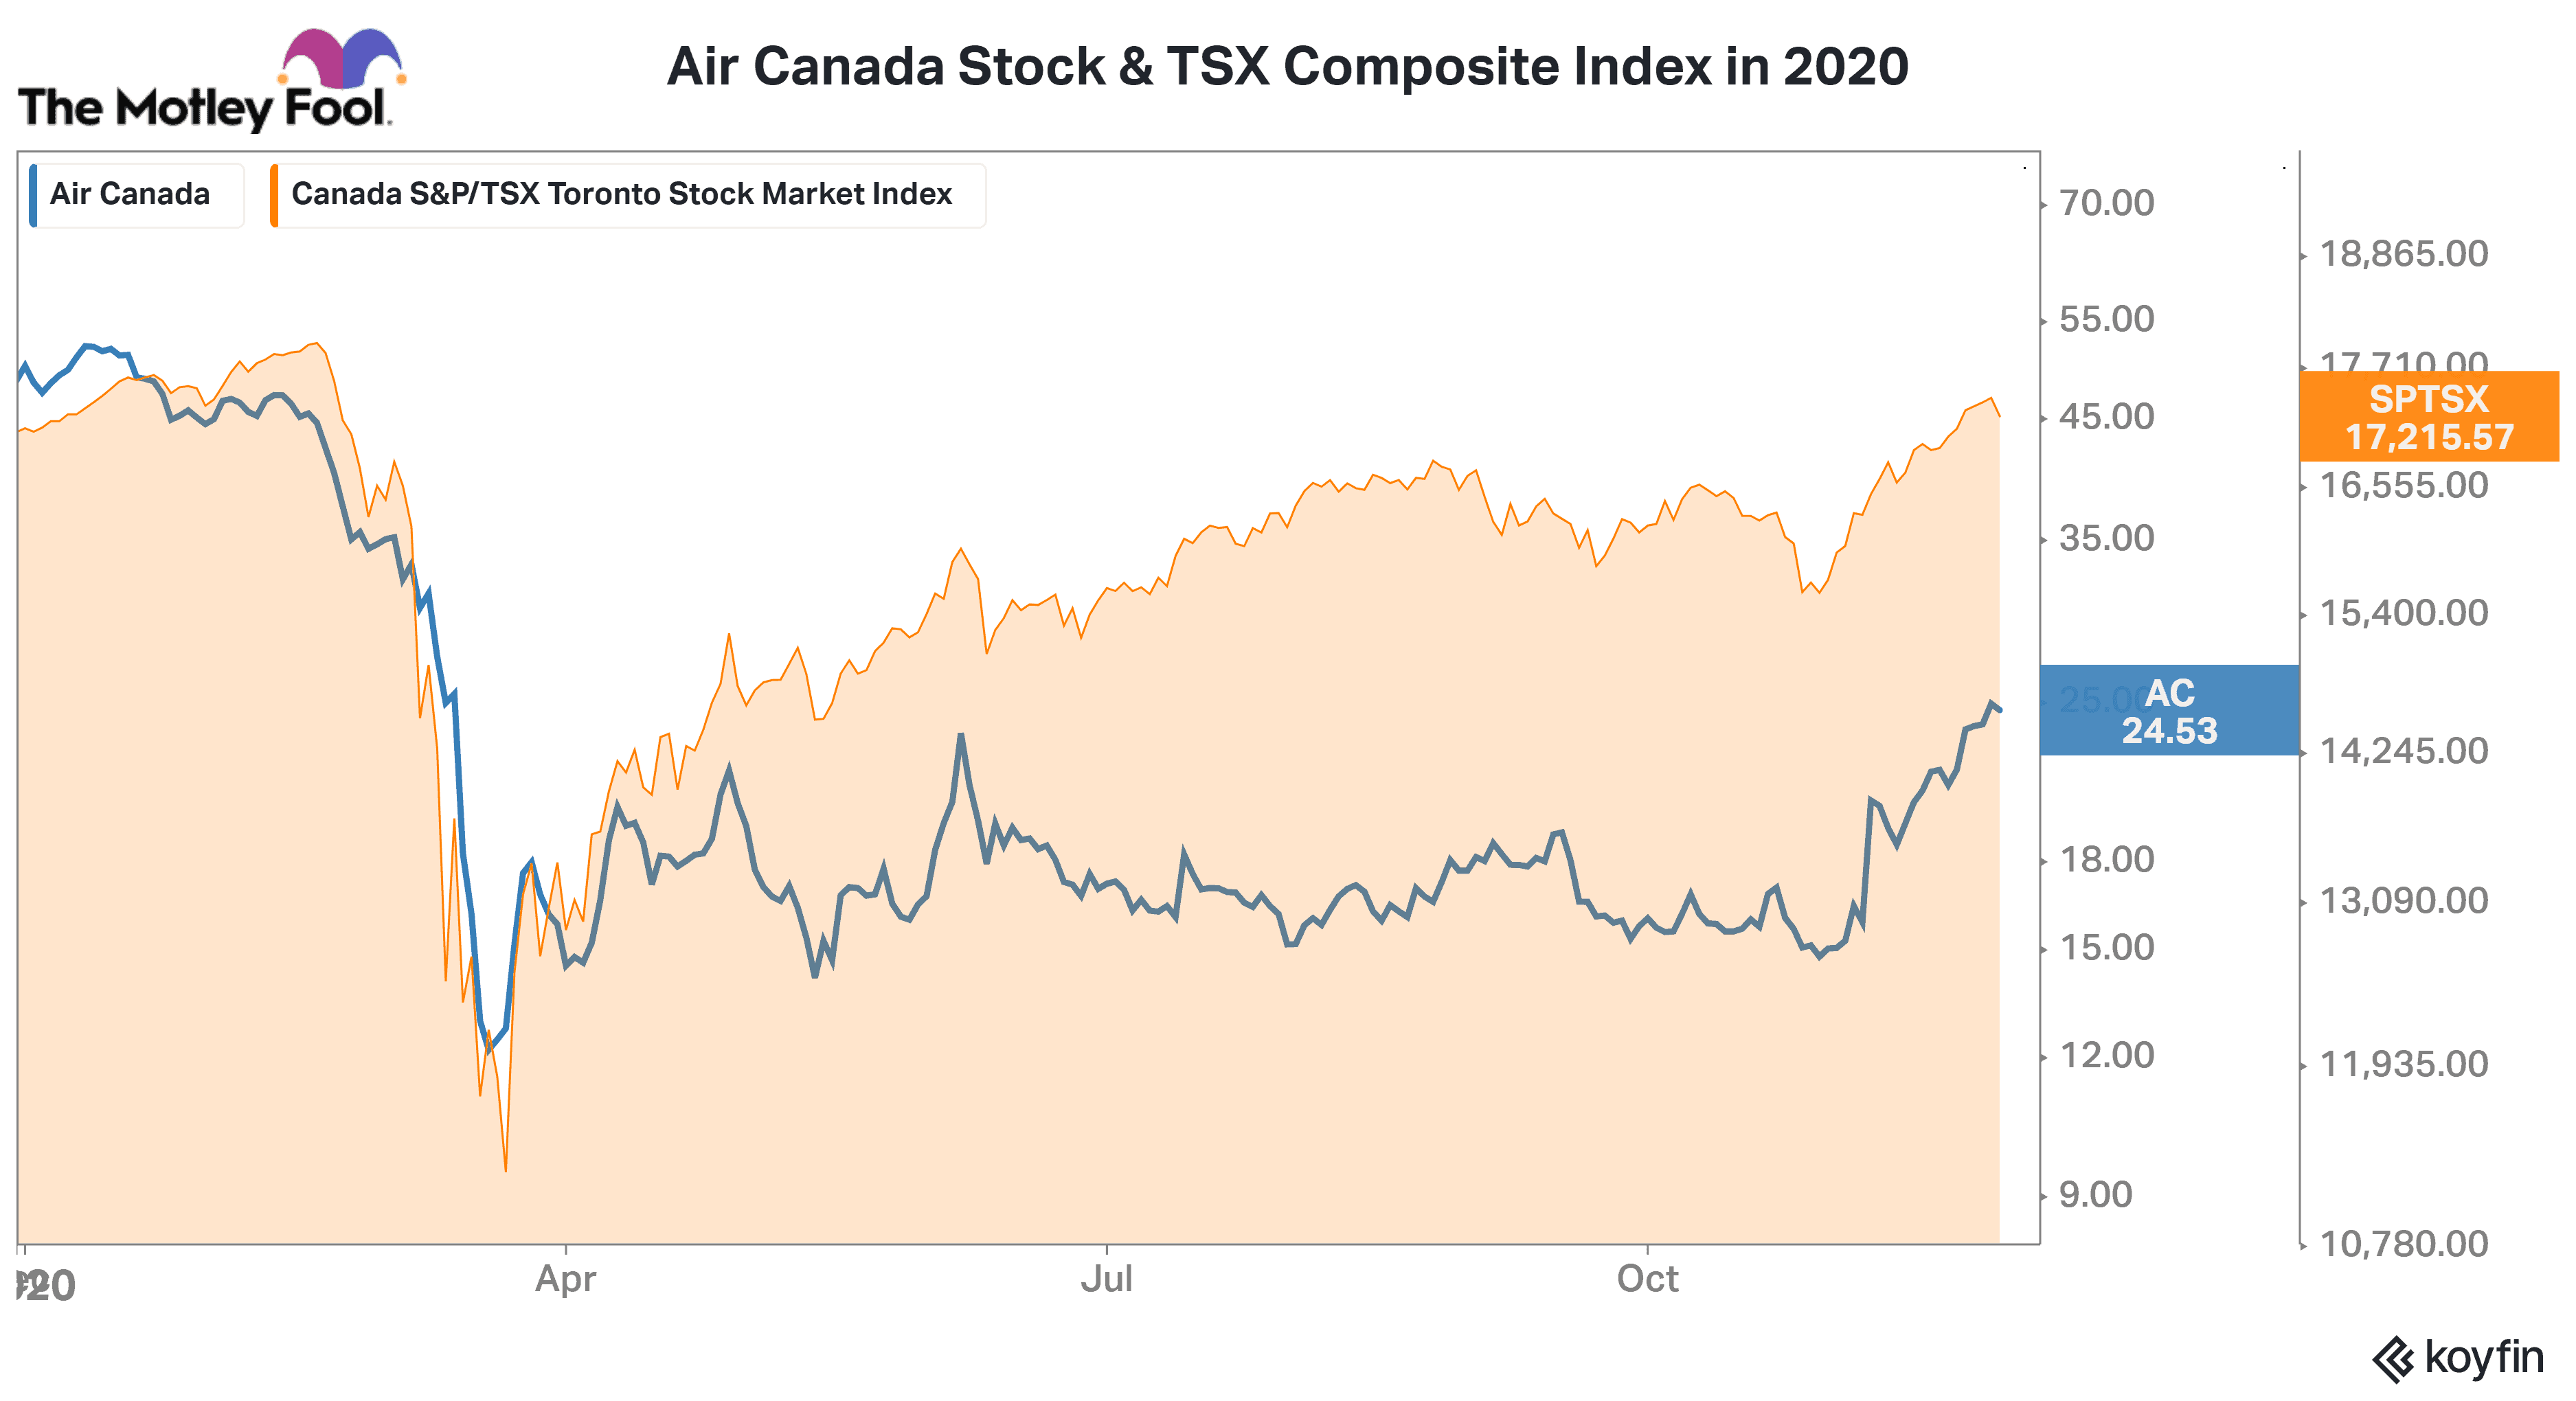 Air Canada Stock & TSX Composite Index in 2020